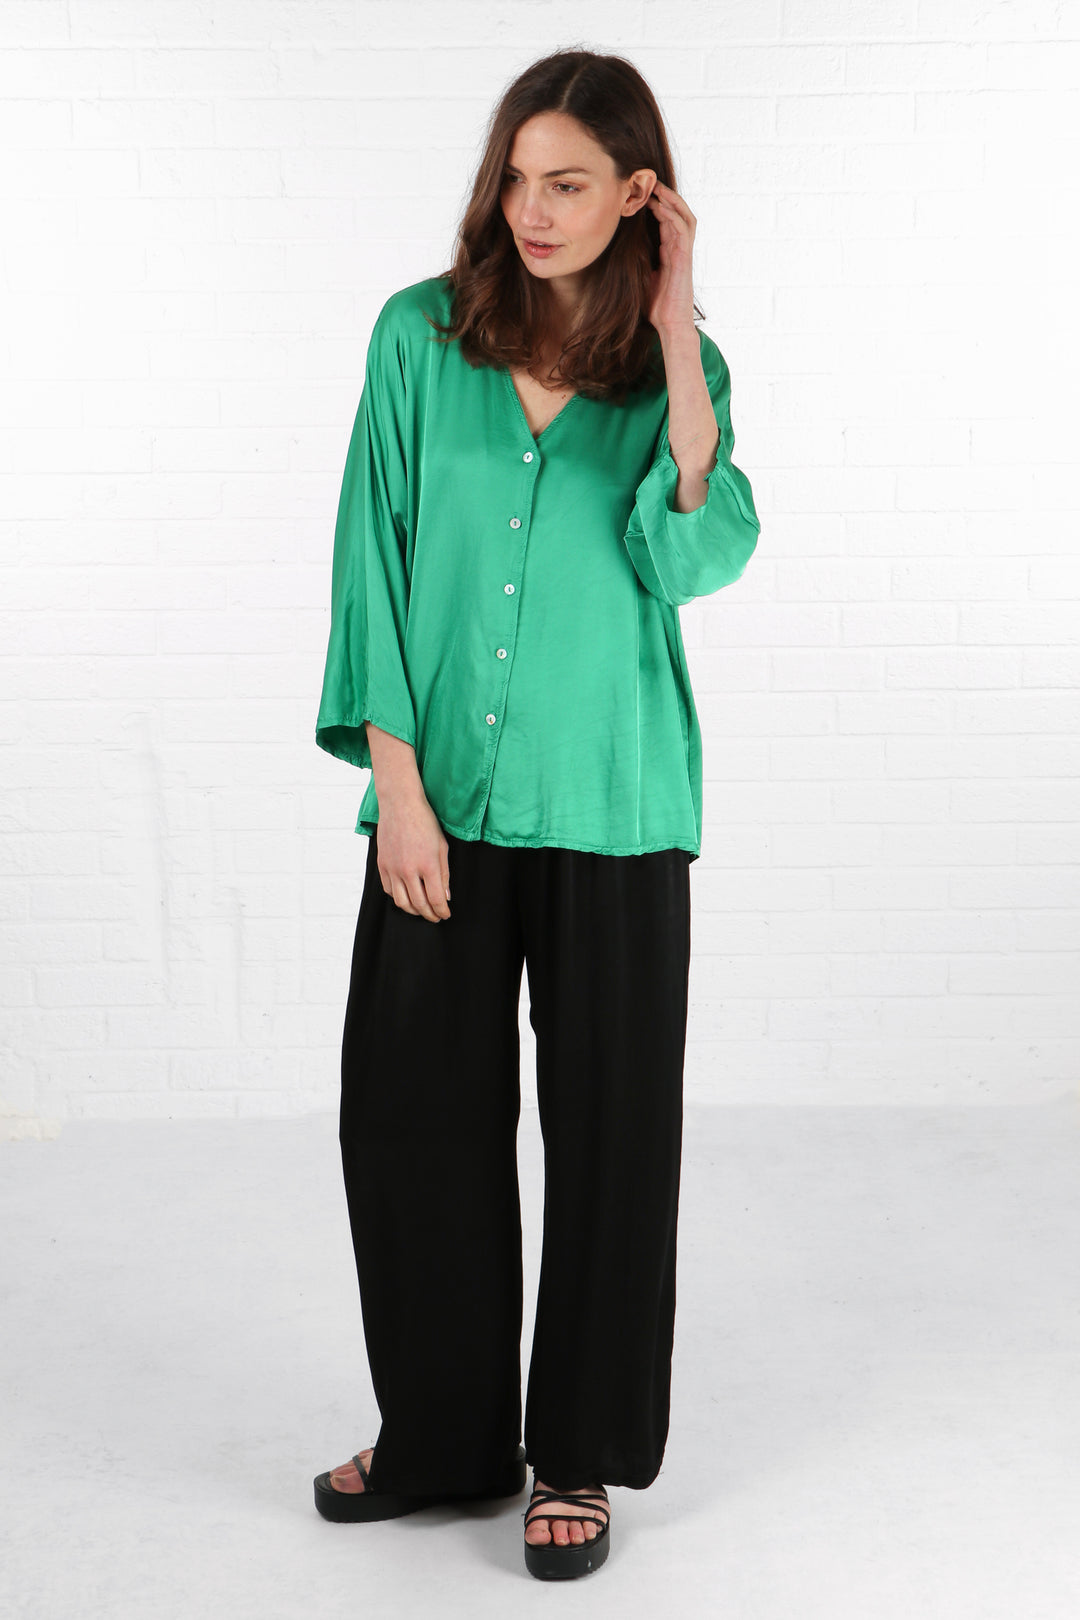 a green 3/4 sleeve silky blouse in a plain bright green